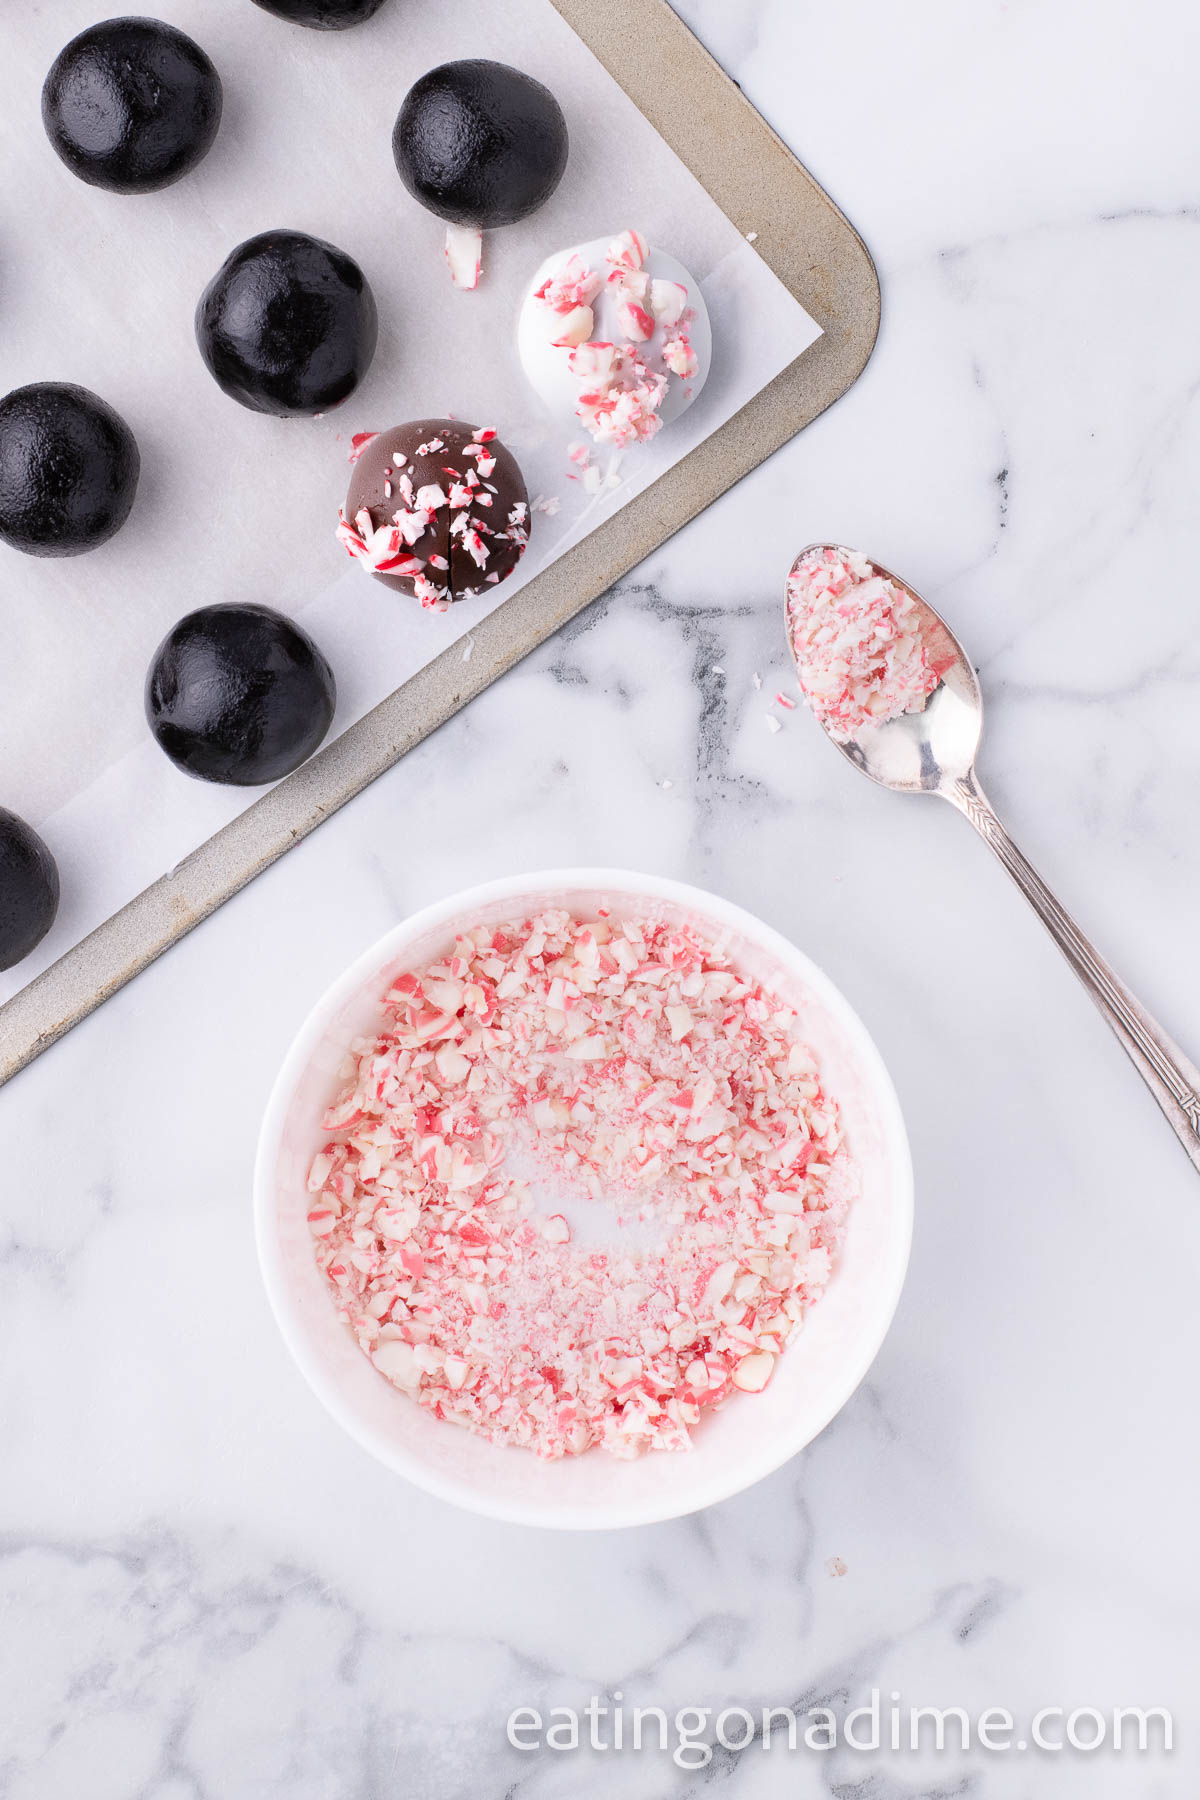 Topping the crushed Peppermint on top of Oreo Balls